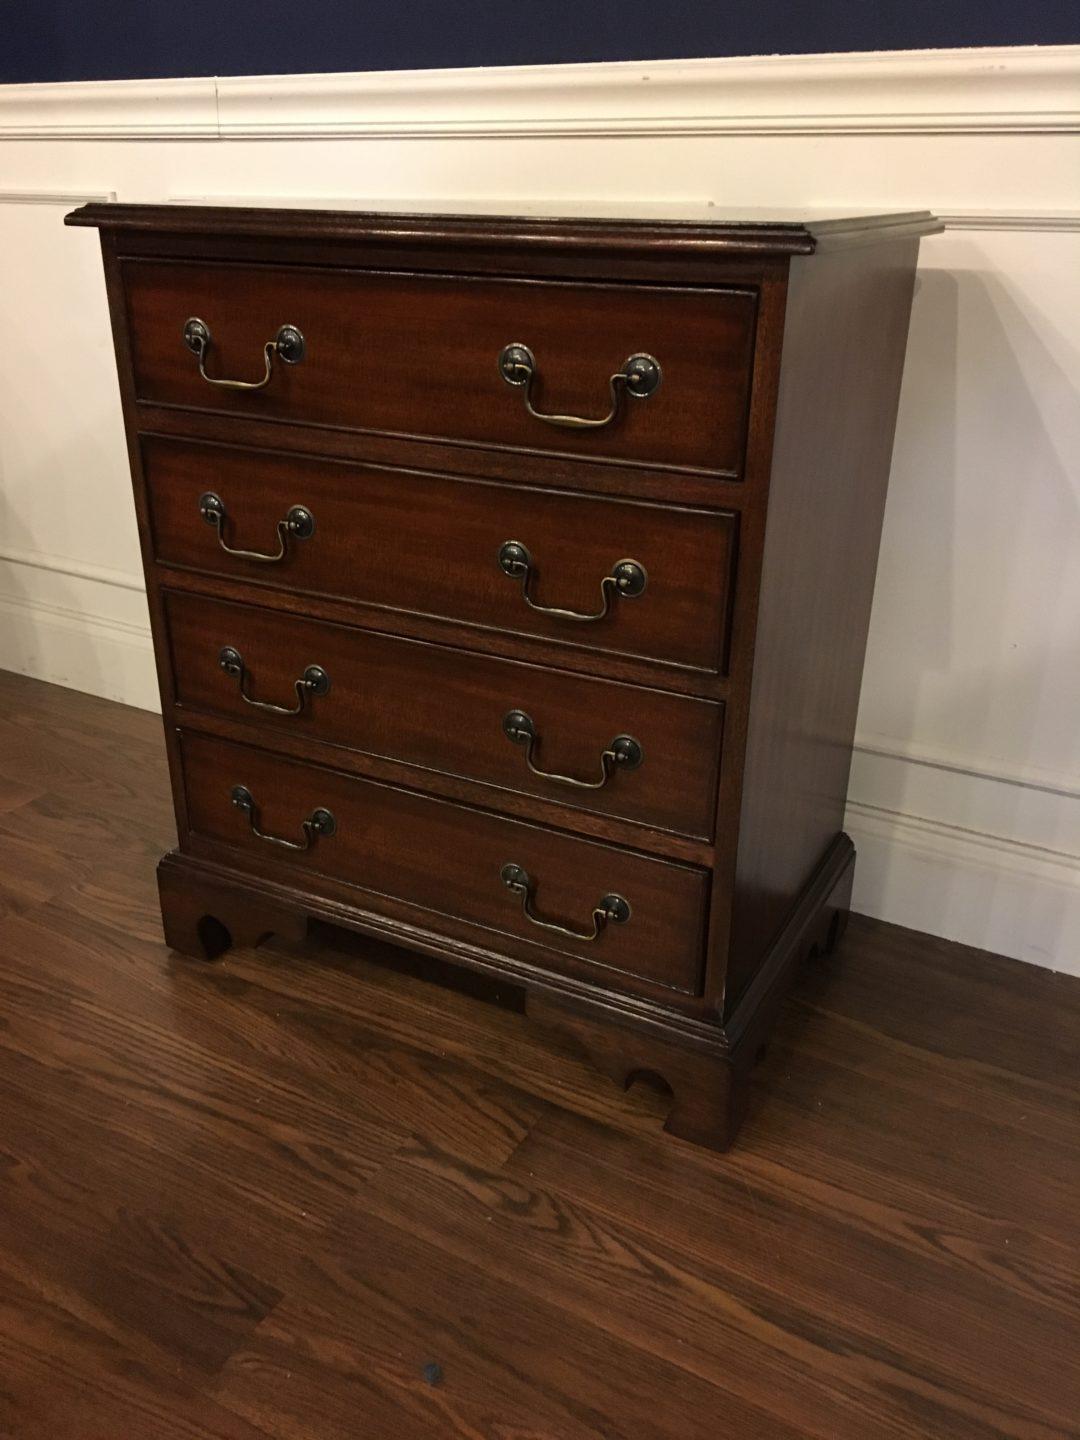 Mahogany Nightstand by Leighton Hall In New Condition For Sale In Suwanee, GA